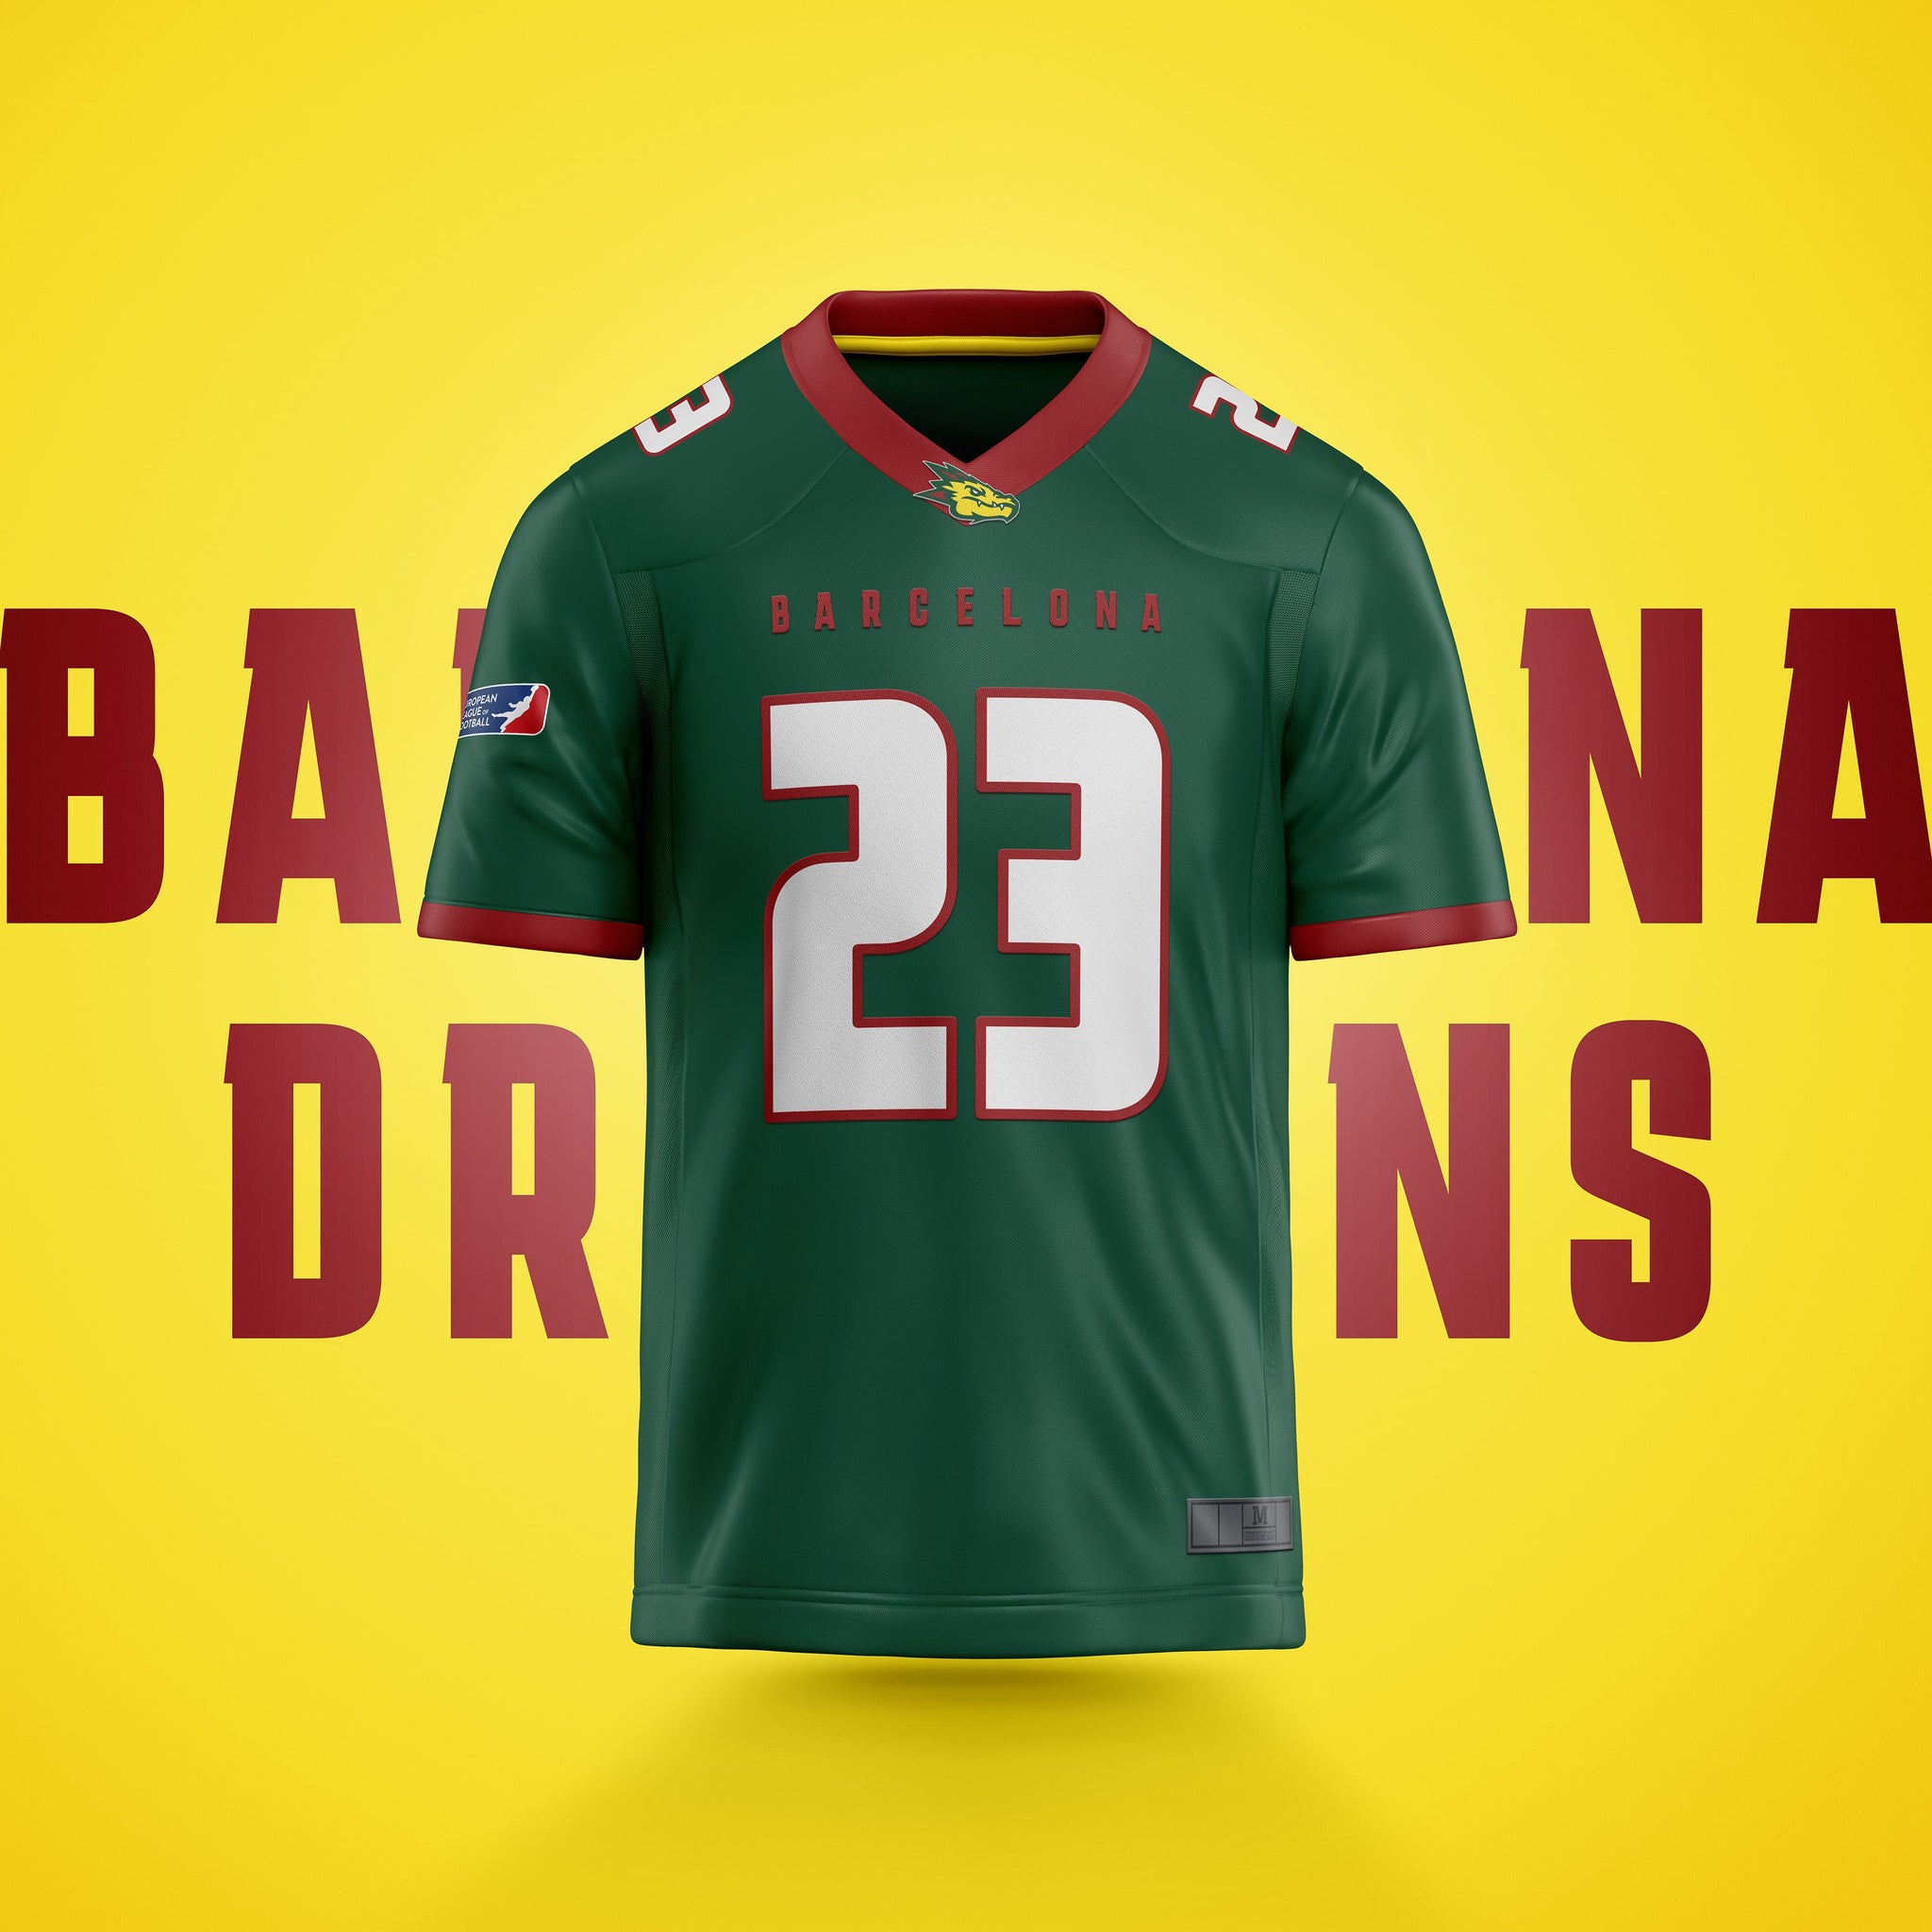 Barcelona Dragons Authentic Game Jersey